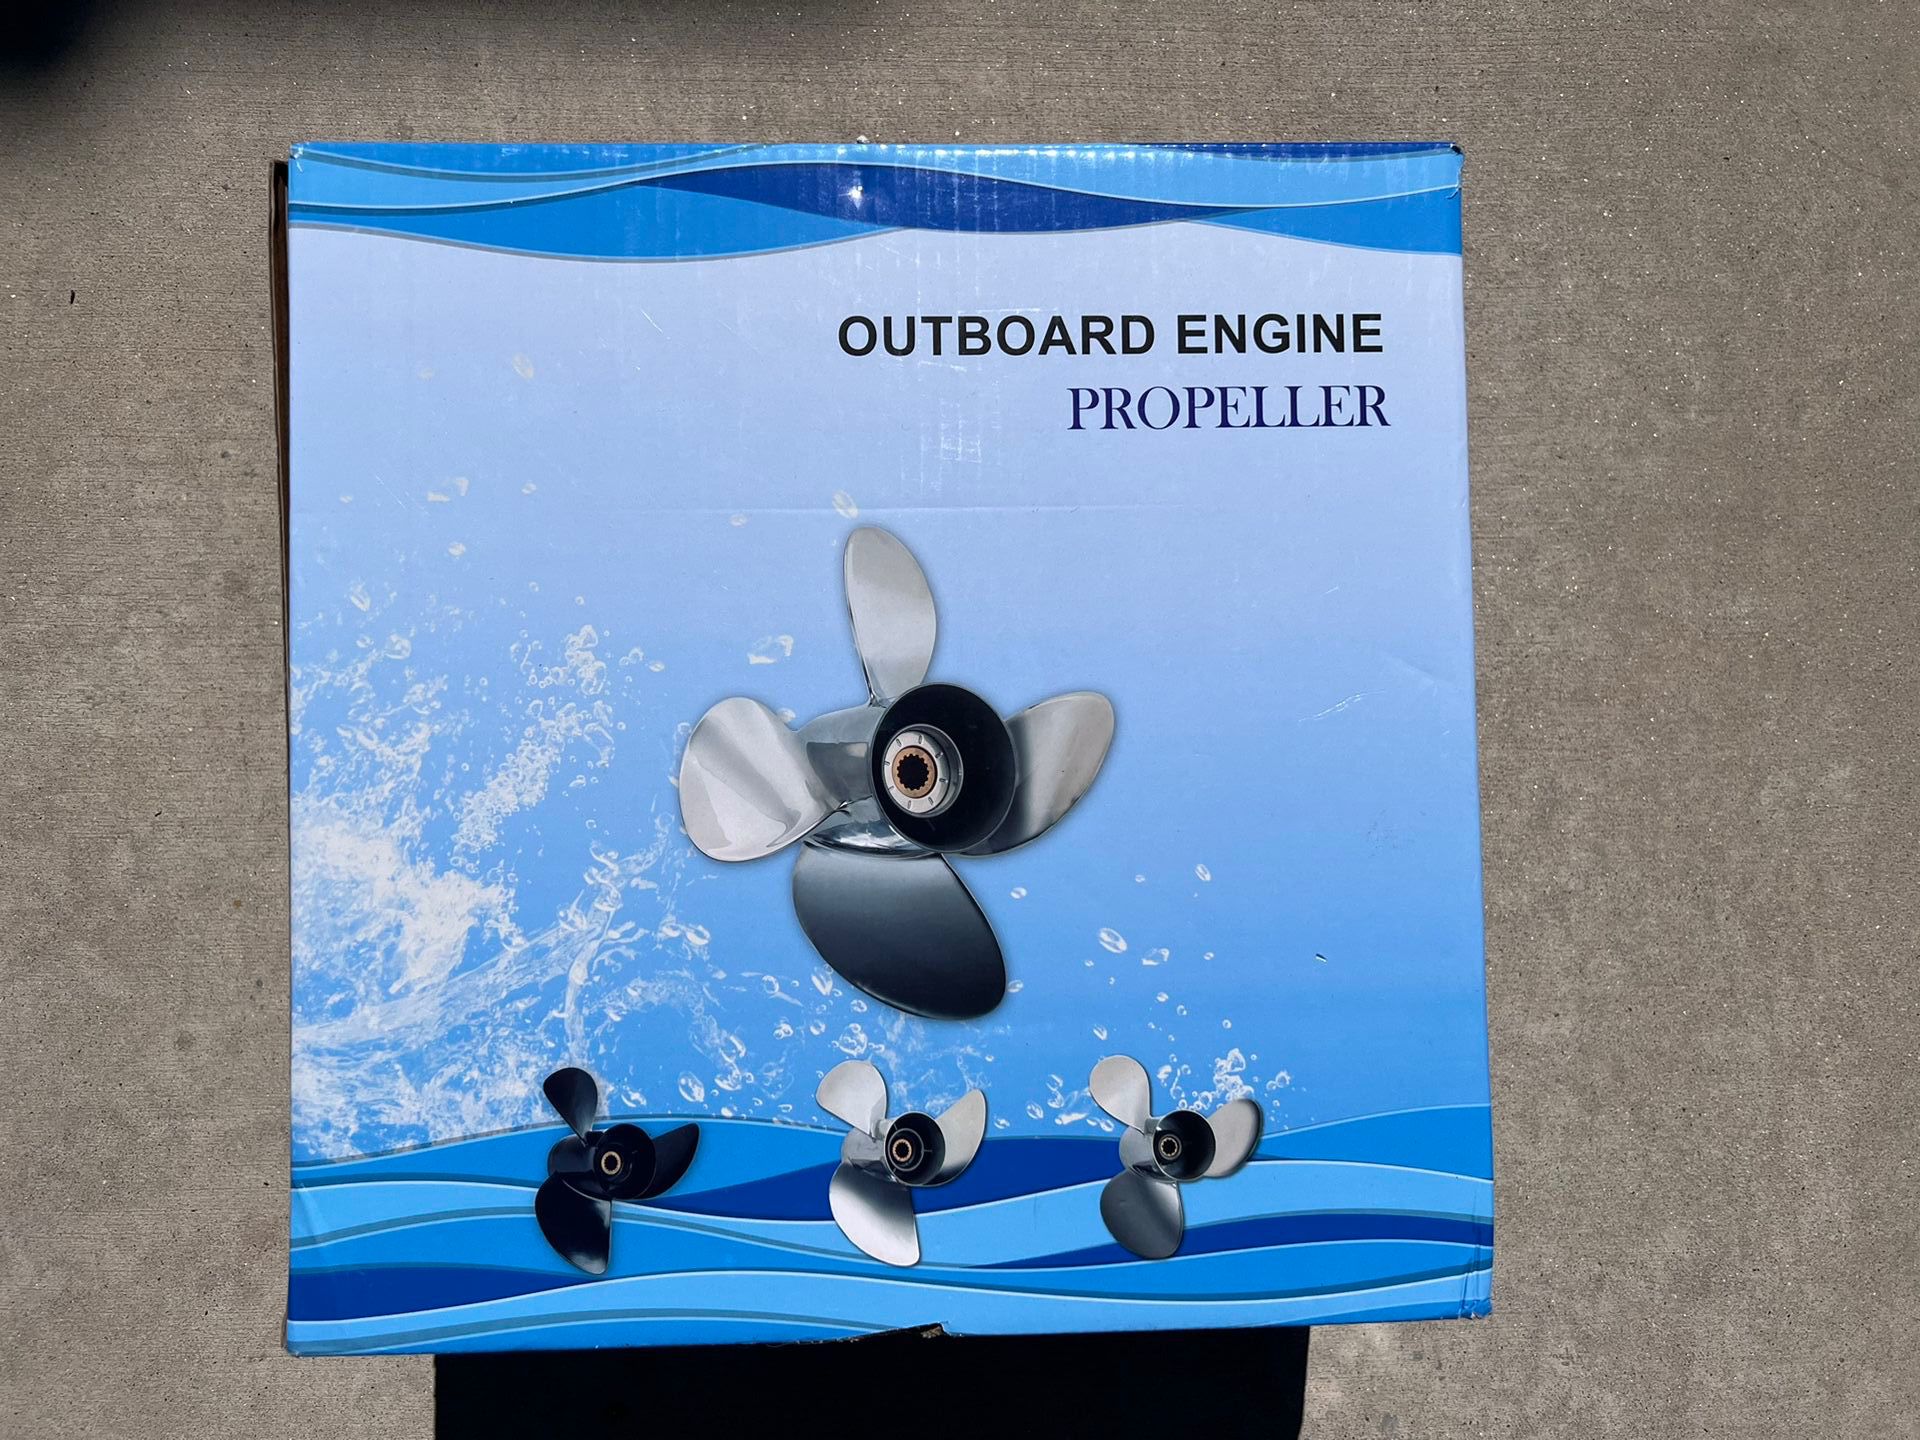 Outboard Engine Performance Propeller